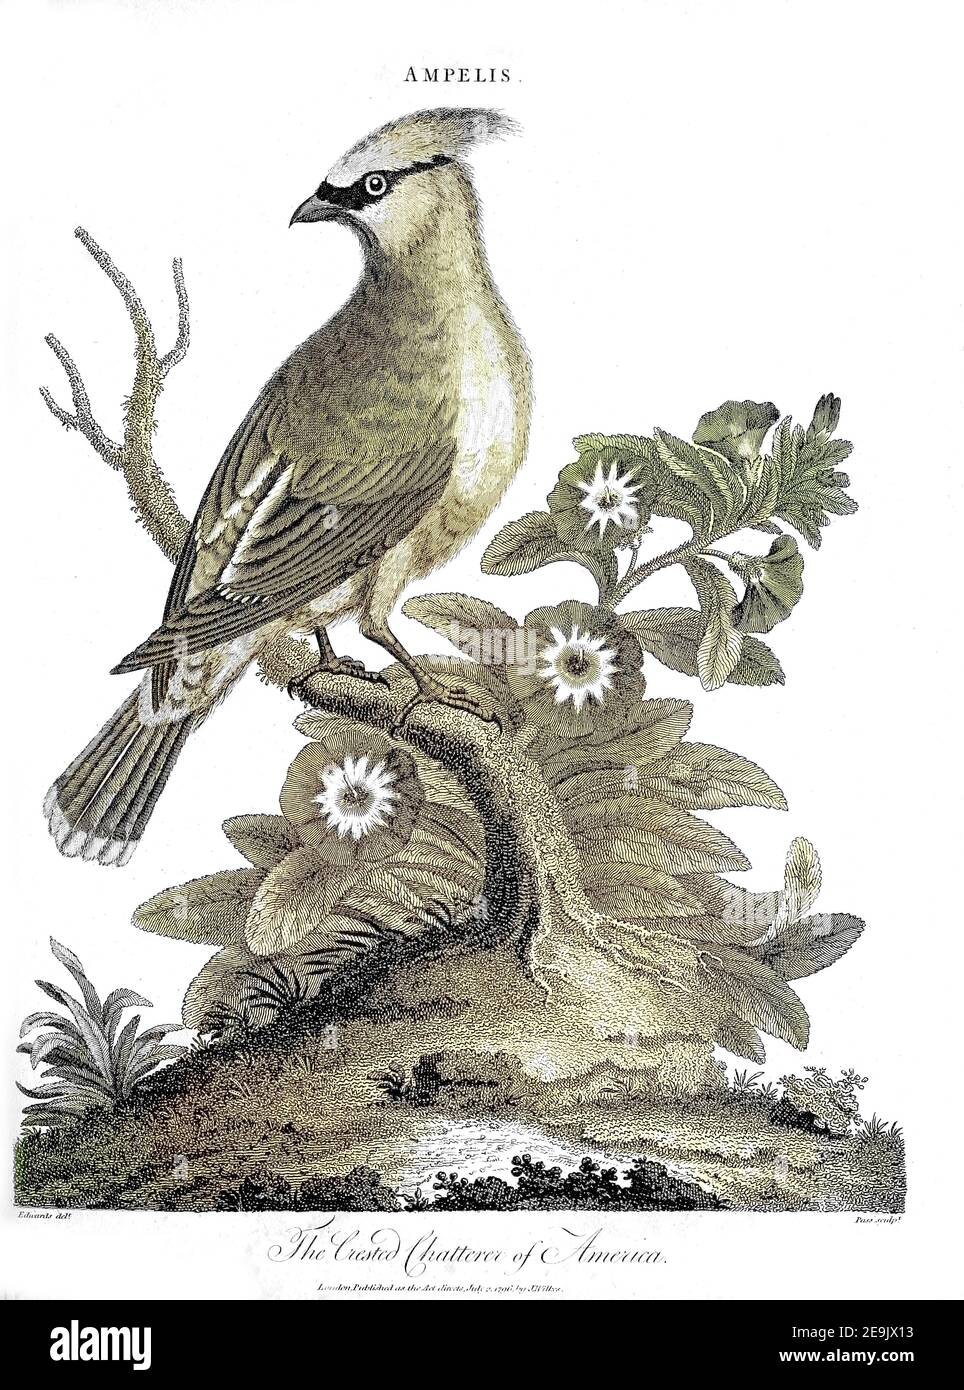 Ampelis - The Crested Chatterer of America Copperplate engraving From the Encyclopaedia Londinensis or, Universal dictionary of arts, sciences, and literature; Volume I;  Edited by Wilkes, John. Published in London in 1810 Stock Photo